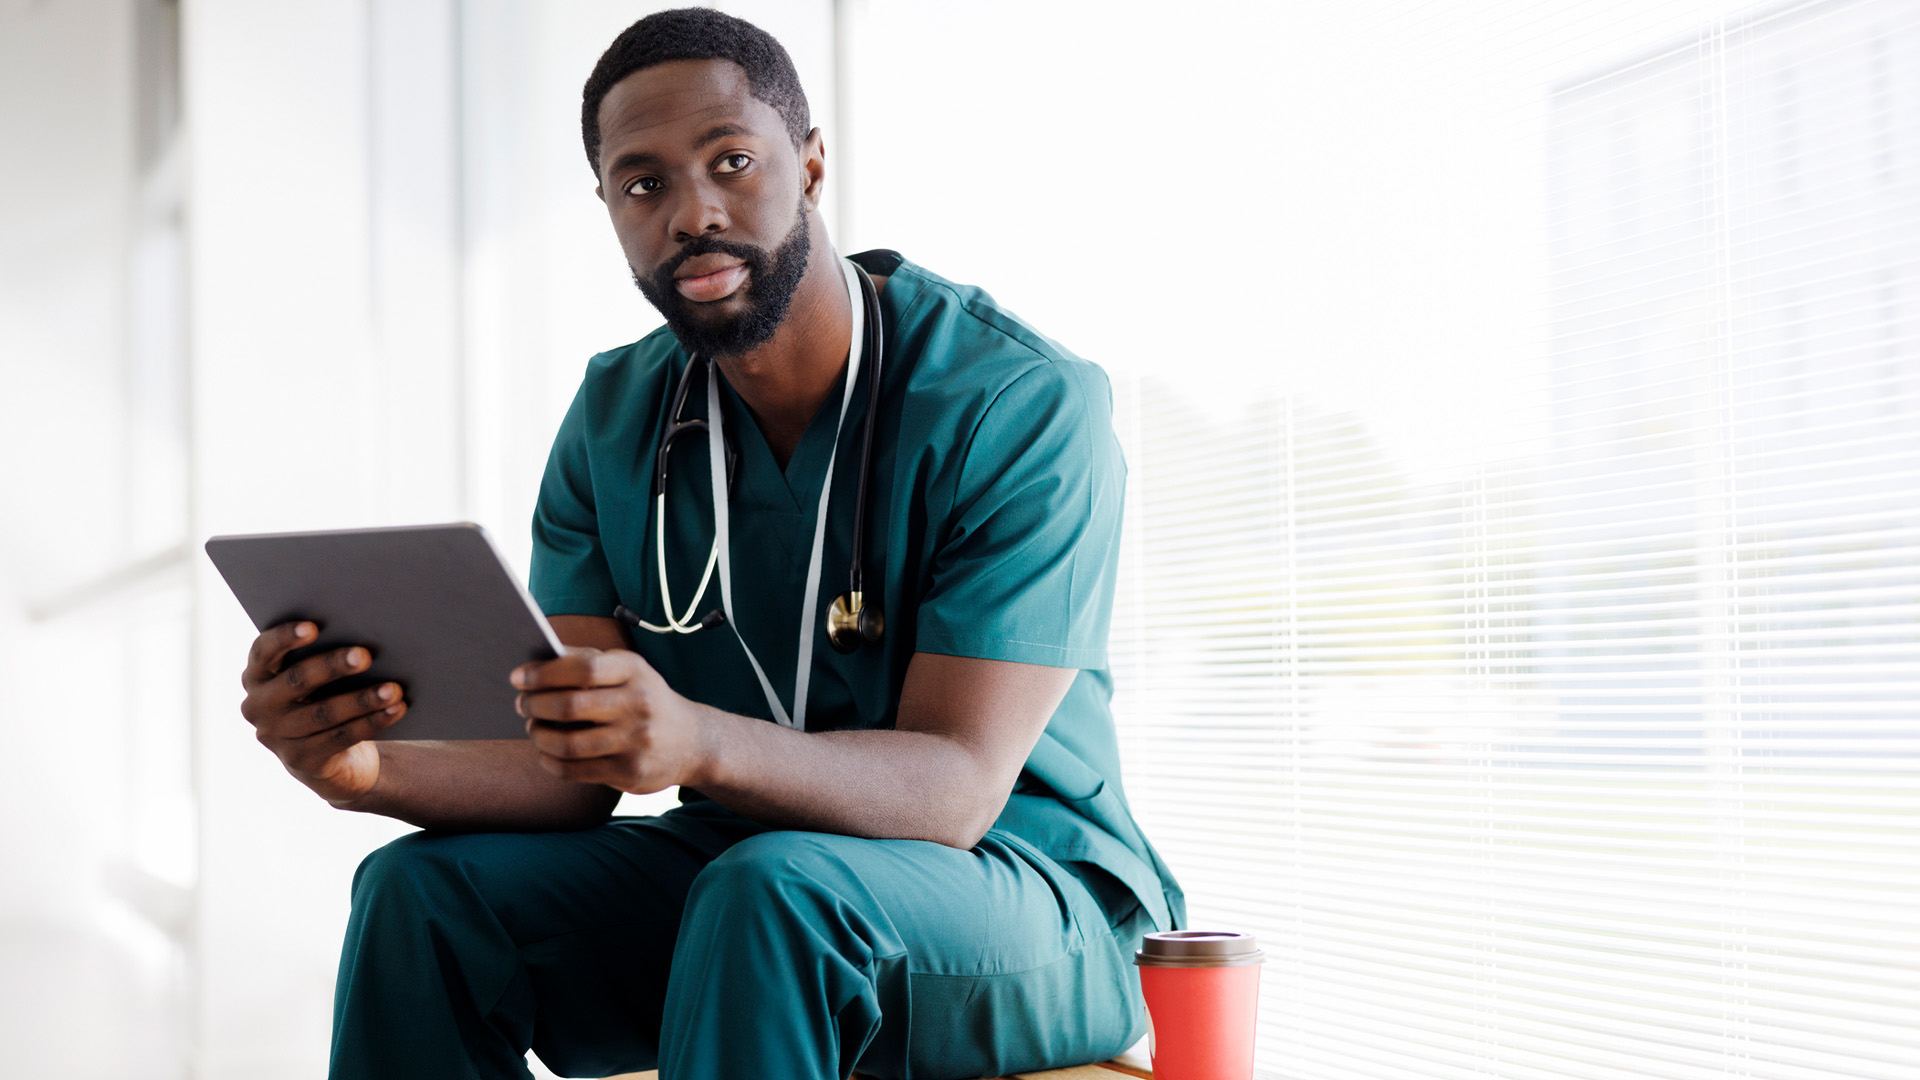 Black People Who Live In US Counties With Black Doctors Have A Higher Life Expectancy, Study Says